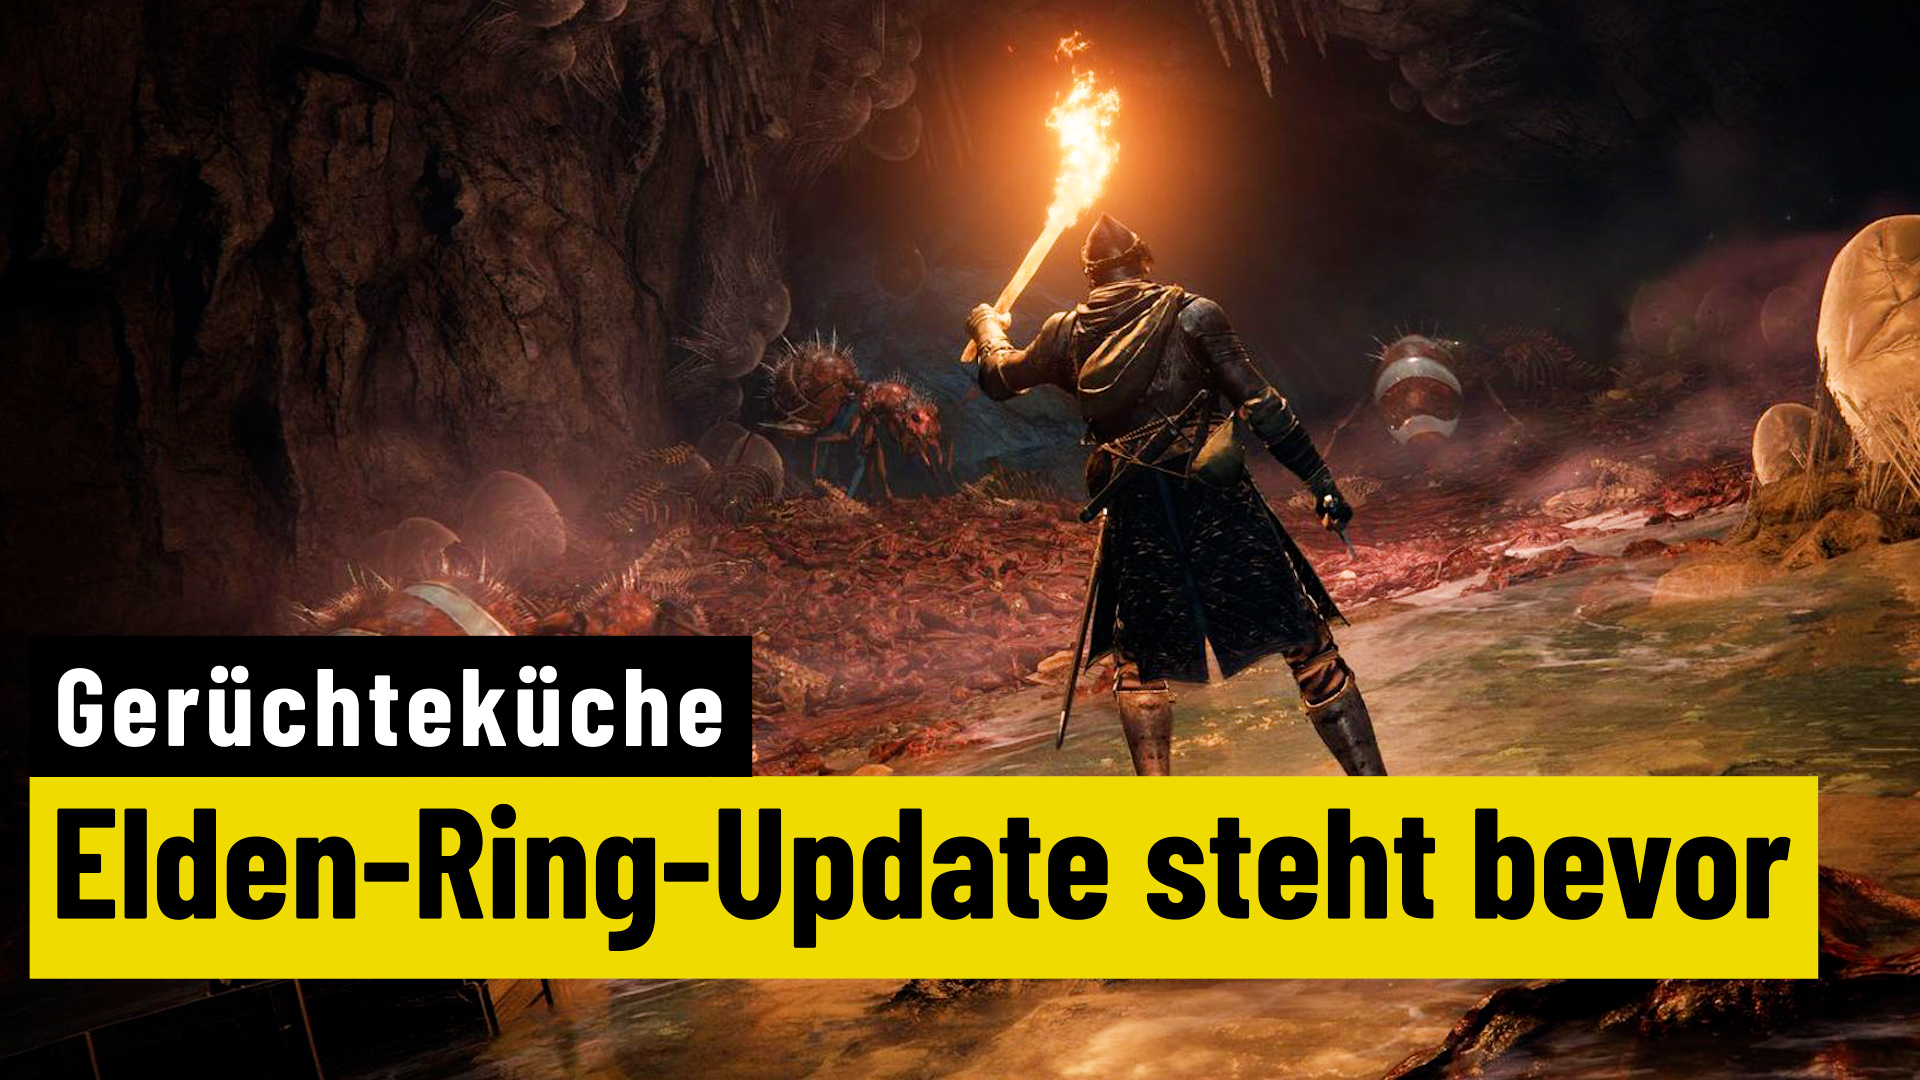 Rumor mill: Solid reference to Elden Ring DLC